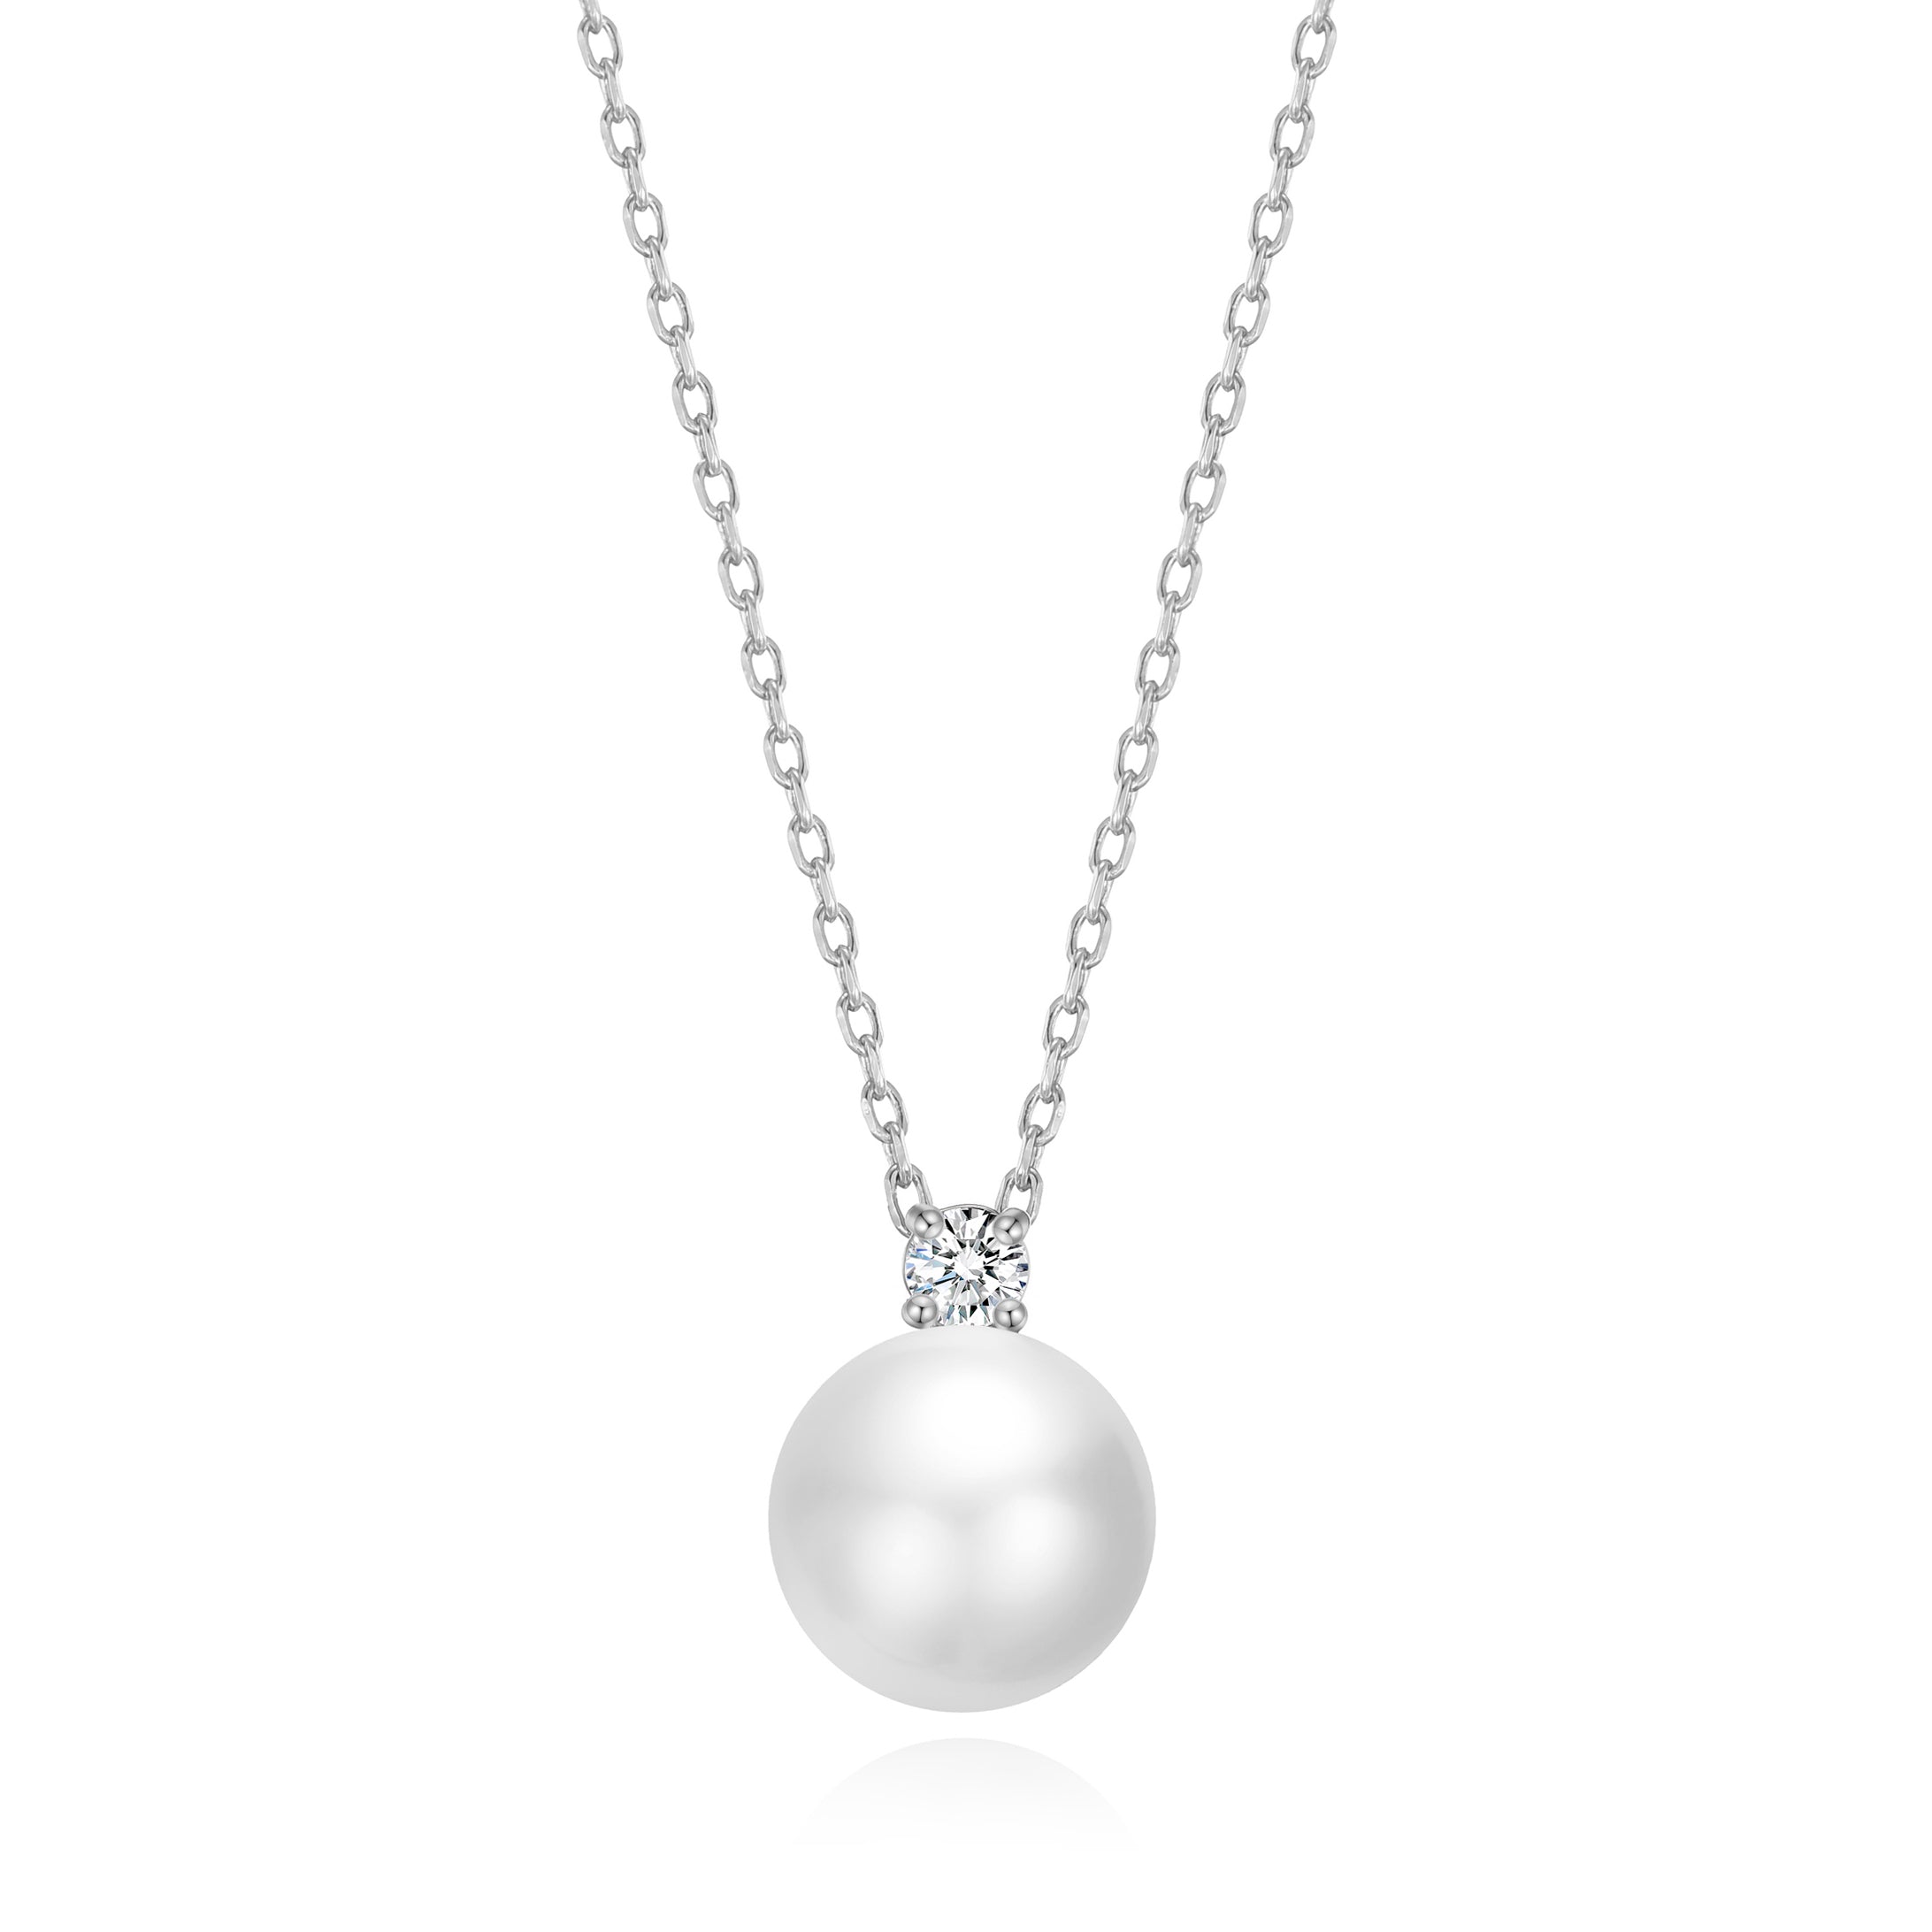 Silver Plated Round Shell Pearl Necklace Created with Zircondia® Crystals by Philip Jones Jewellery